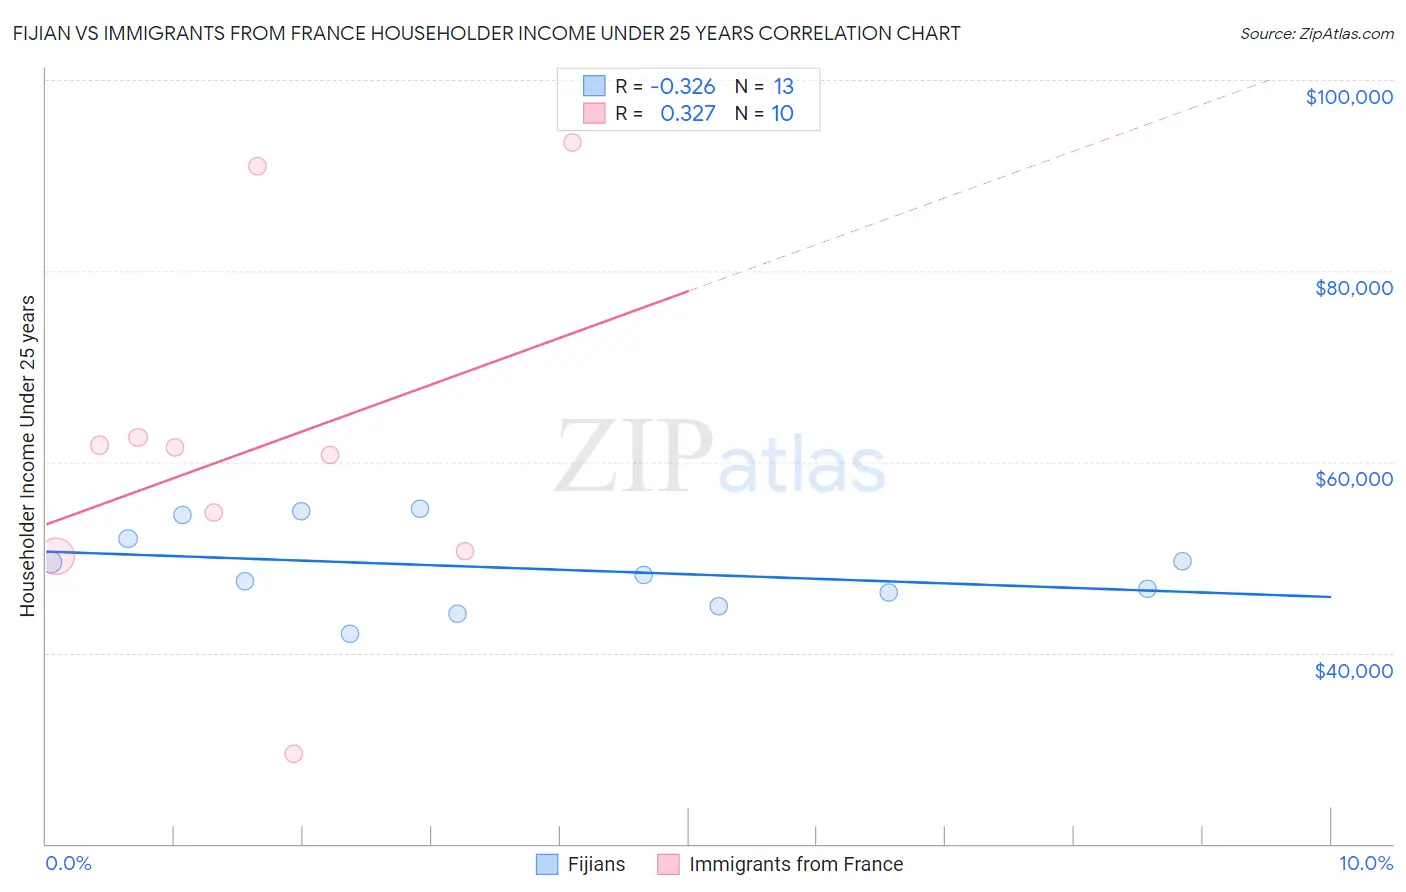 Fijian vs Immigrants from France Householder Income Under 25 years